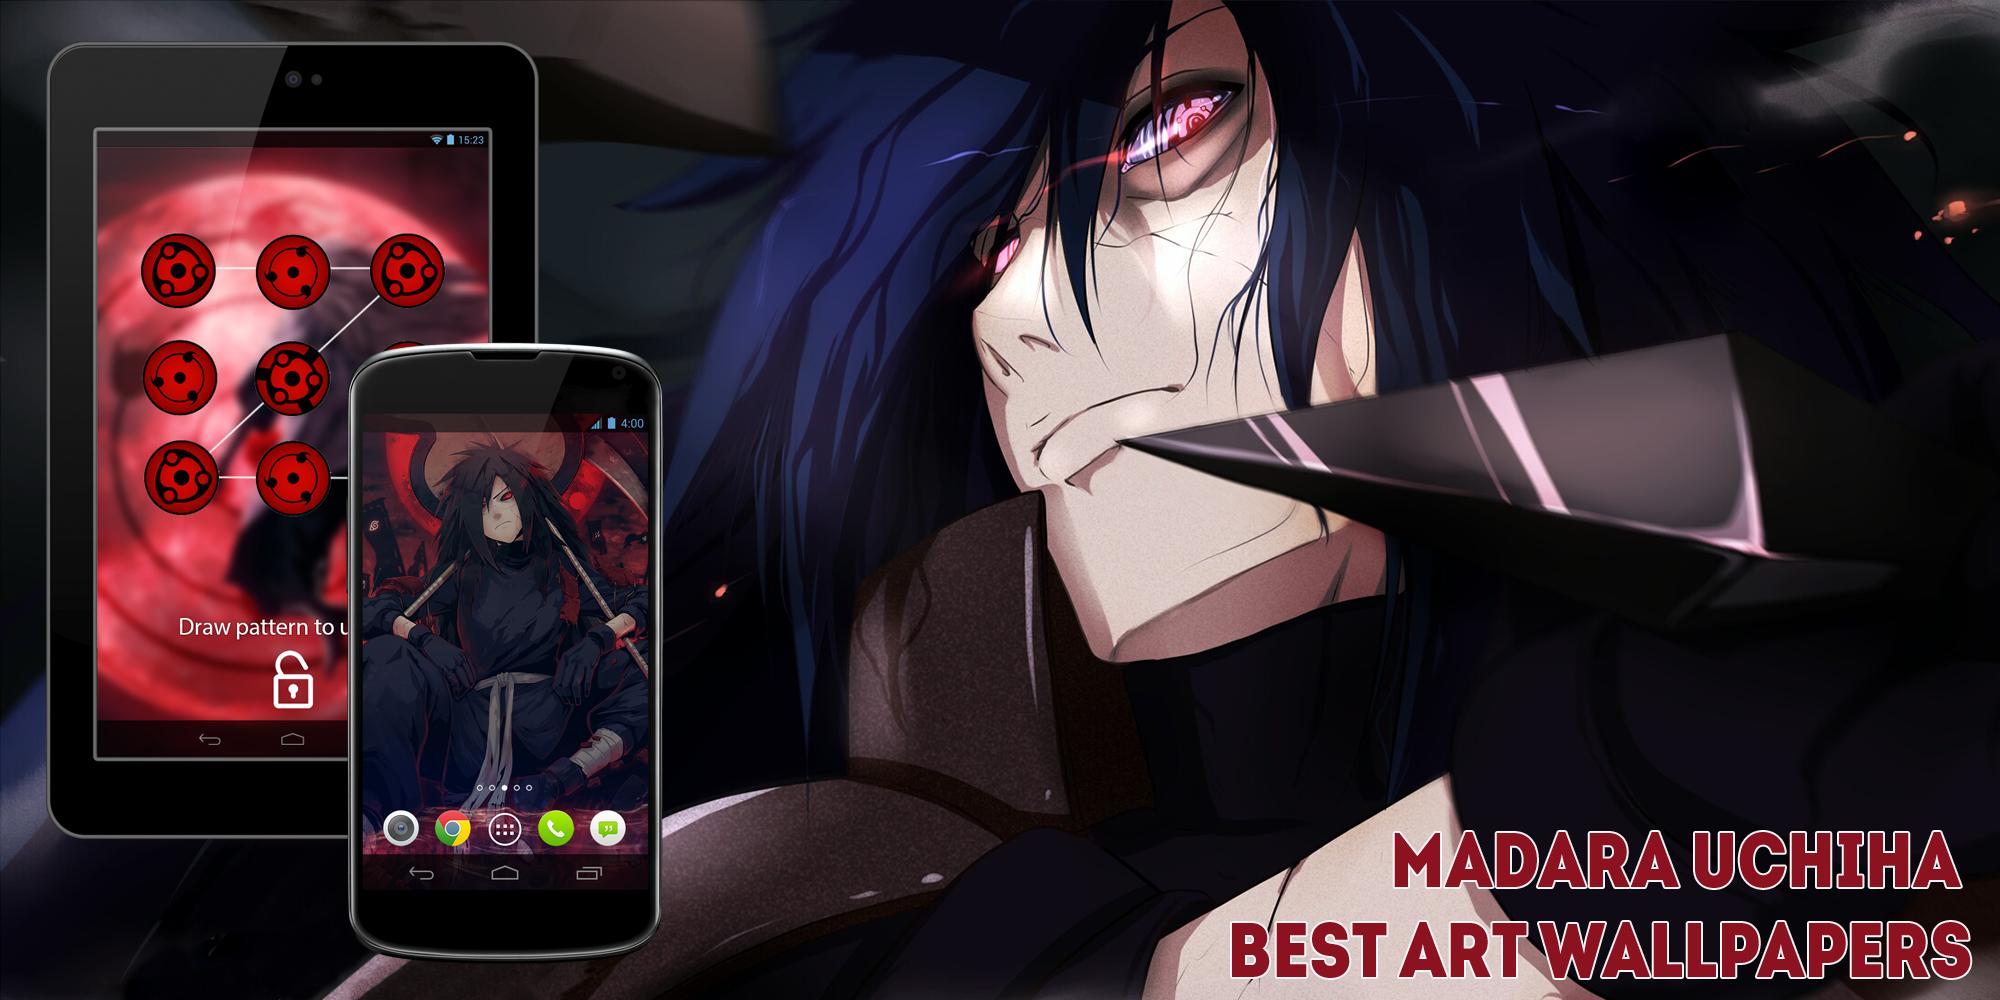 Madara Uchiha Anime Lock Screen Wallpapers For Android